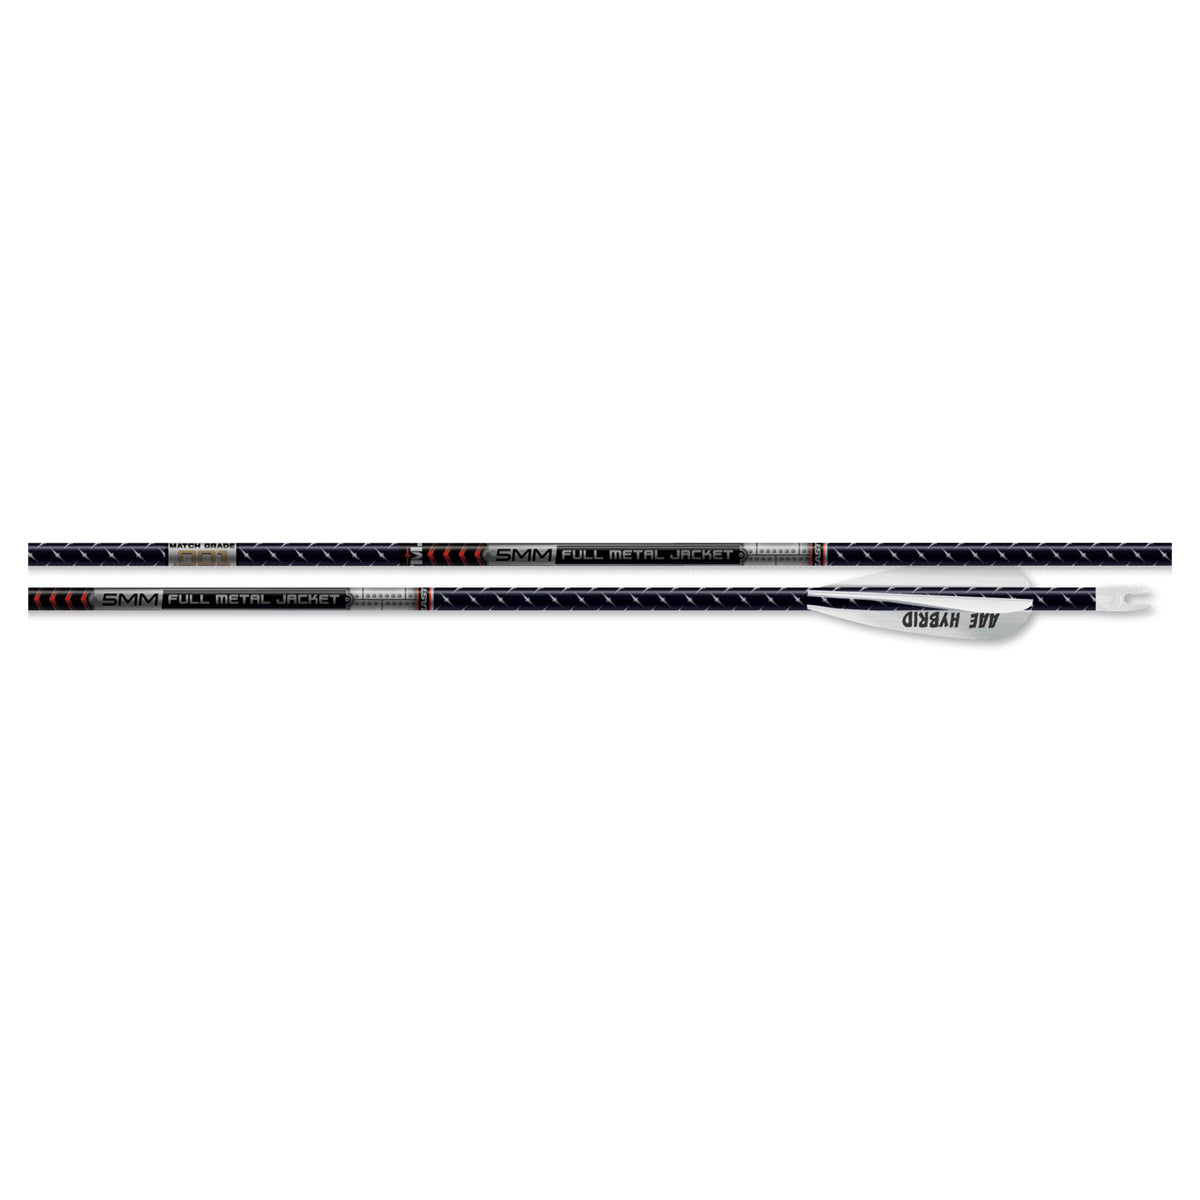 Easton FMJ 5MM Match Grade Pro Shop Series Pre-Fletched Arrow Shafts - 6 Count in  by GOHUNT | Easton - GOHUNT Shop